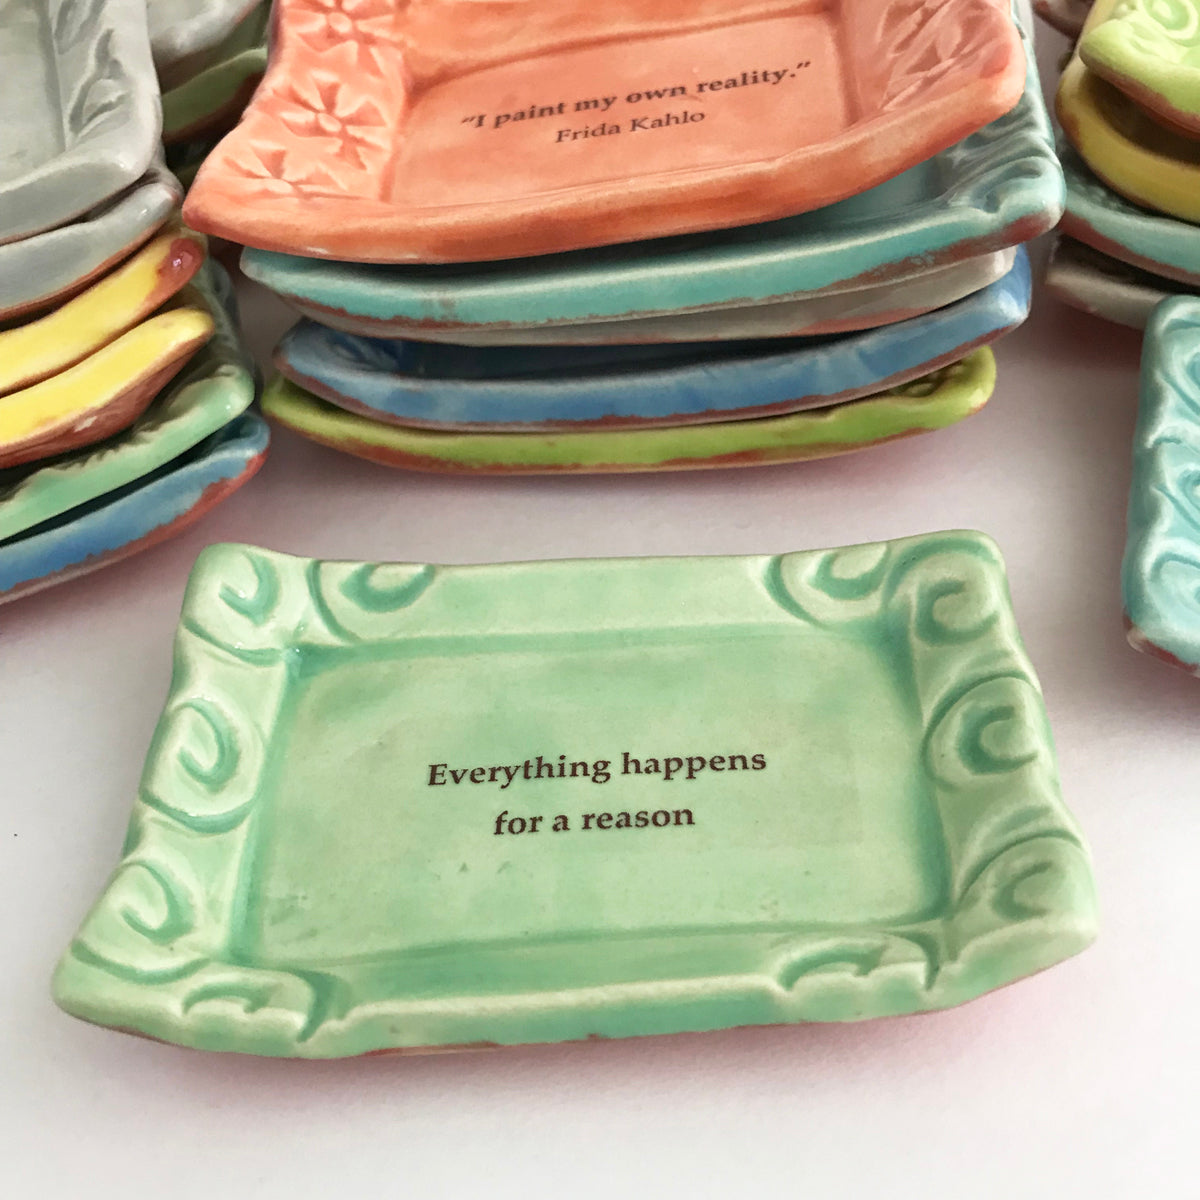 "Everything happens for a reason" quote on handmade ceramic dish.  